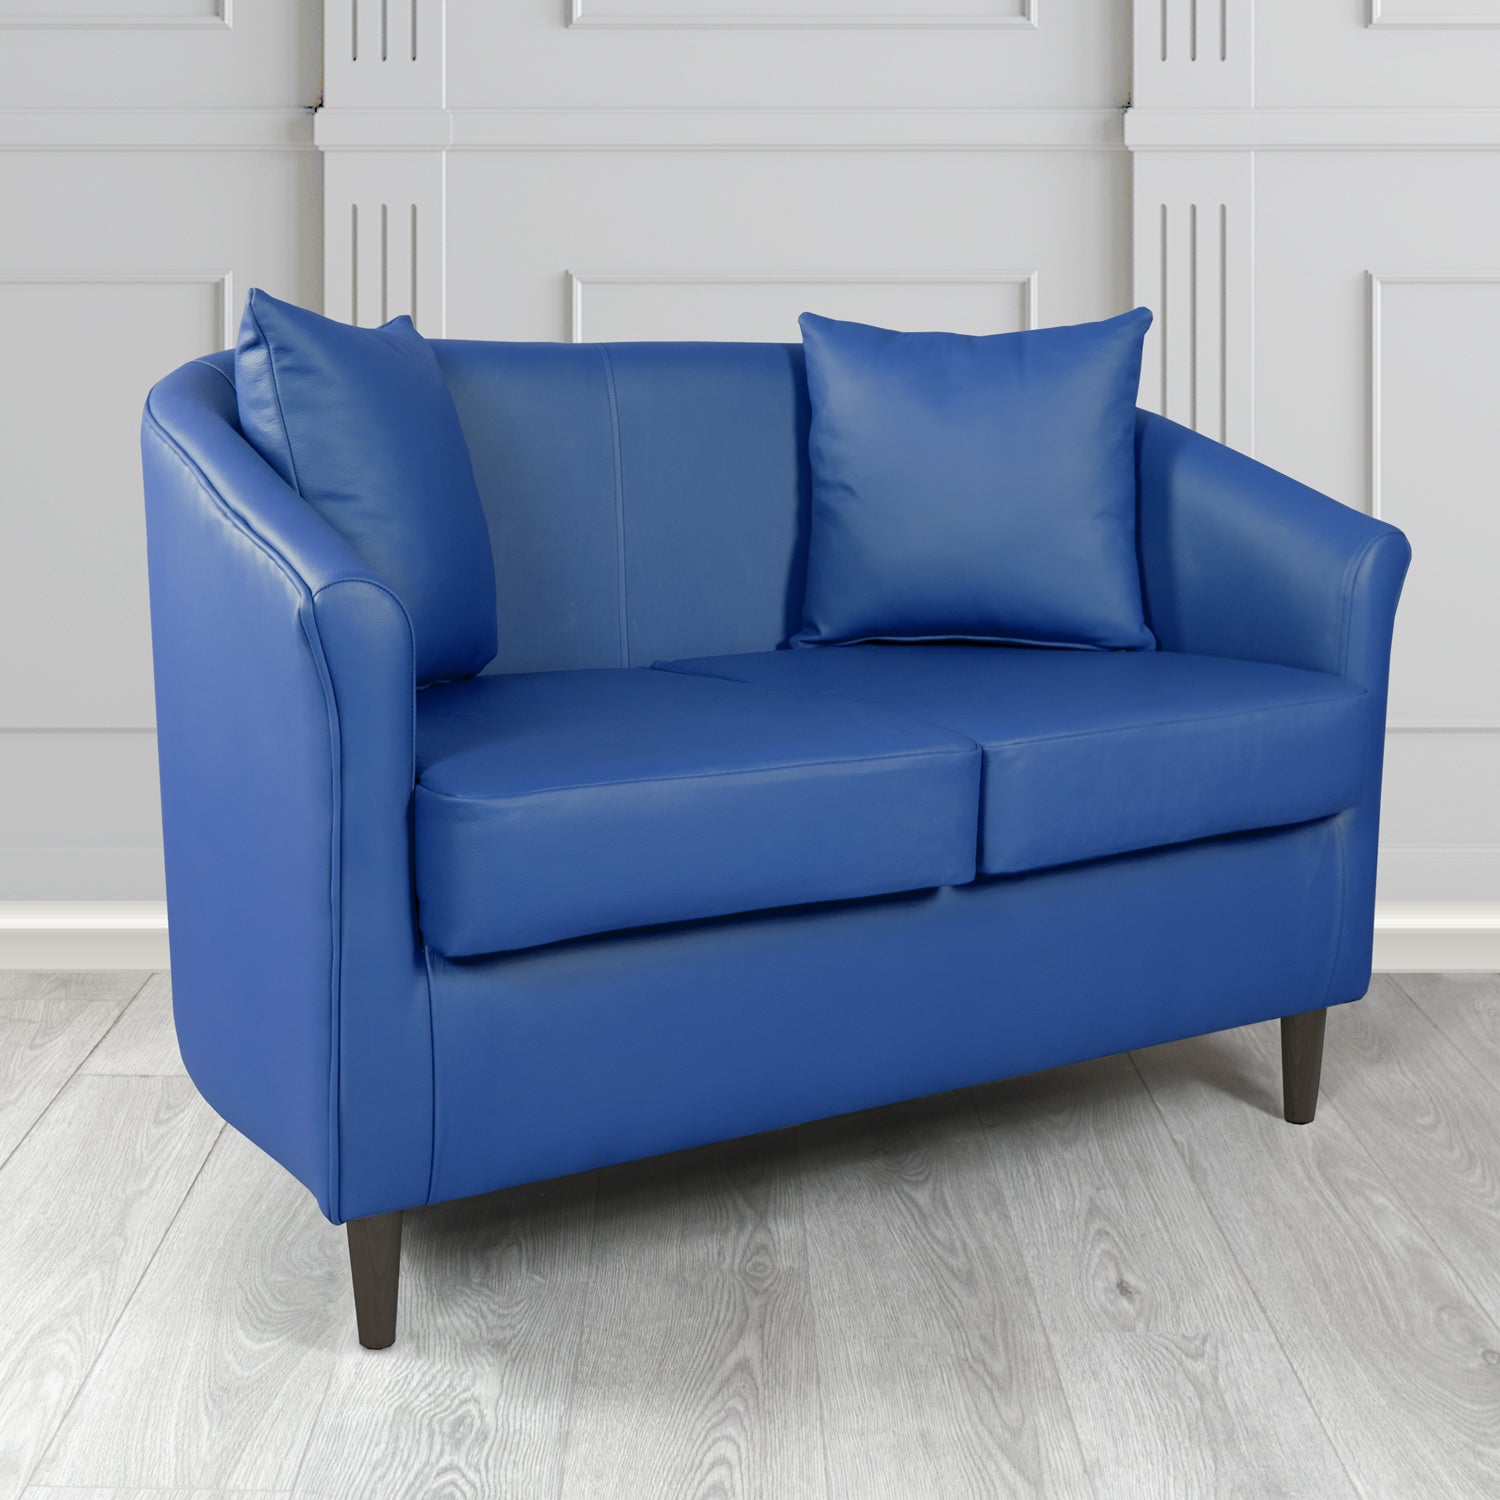 St Tropez Shelly Deep Ultramarine Crib 5 Genuine Leather 2 Seater Tub Sofa with Scatter Cushions - The Tub Chair Shop